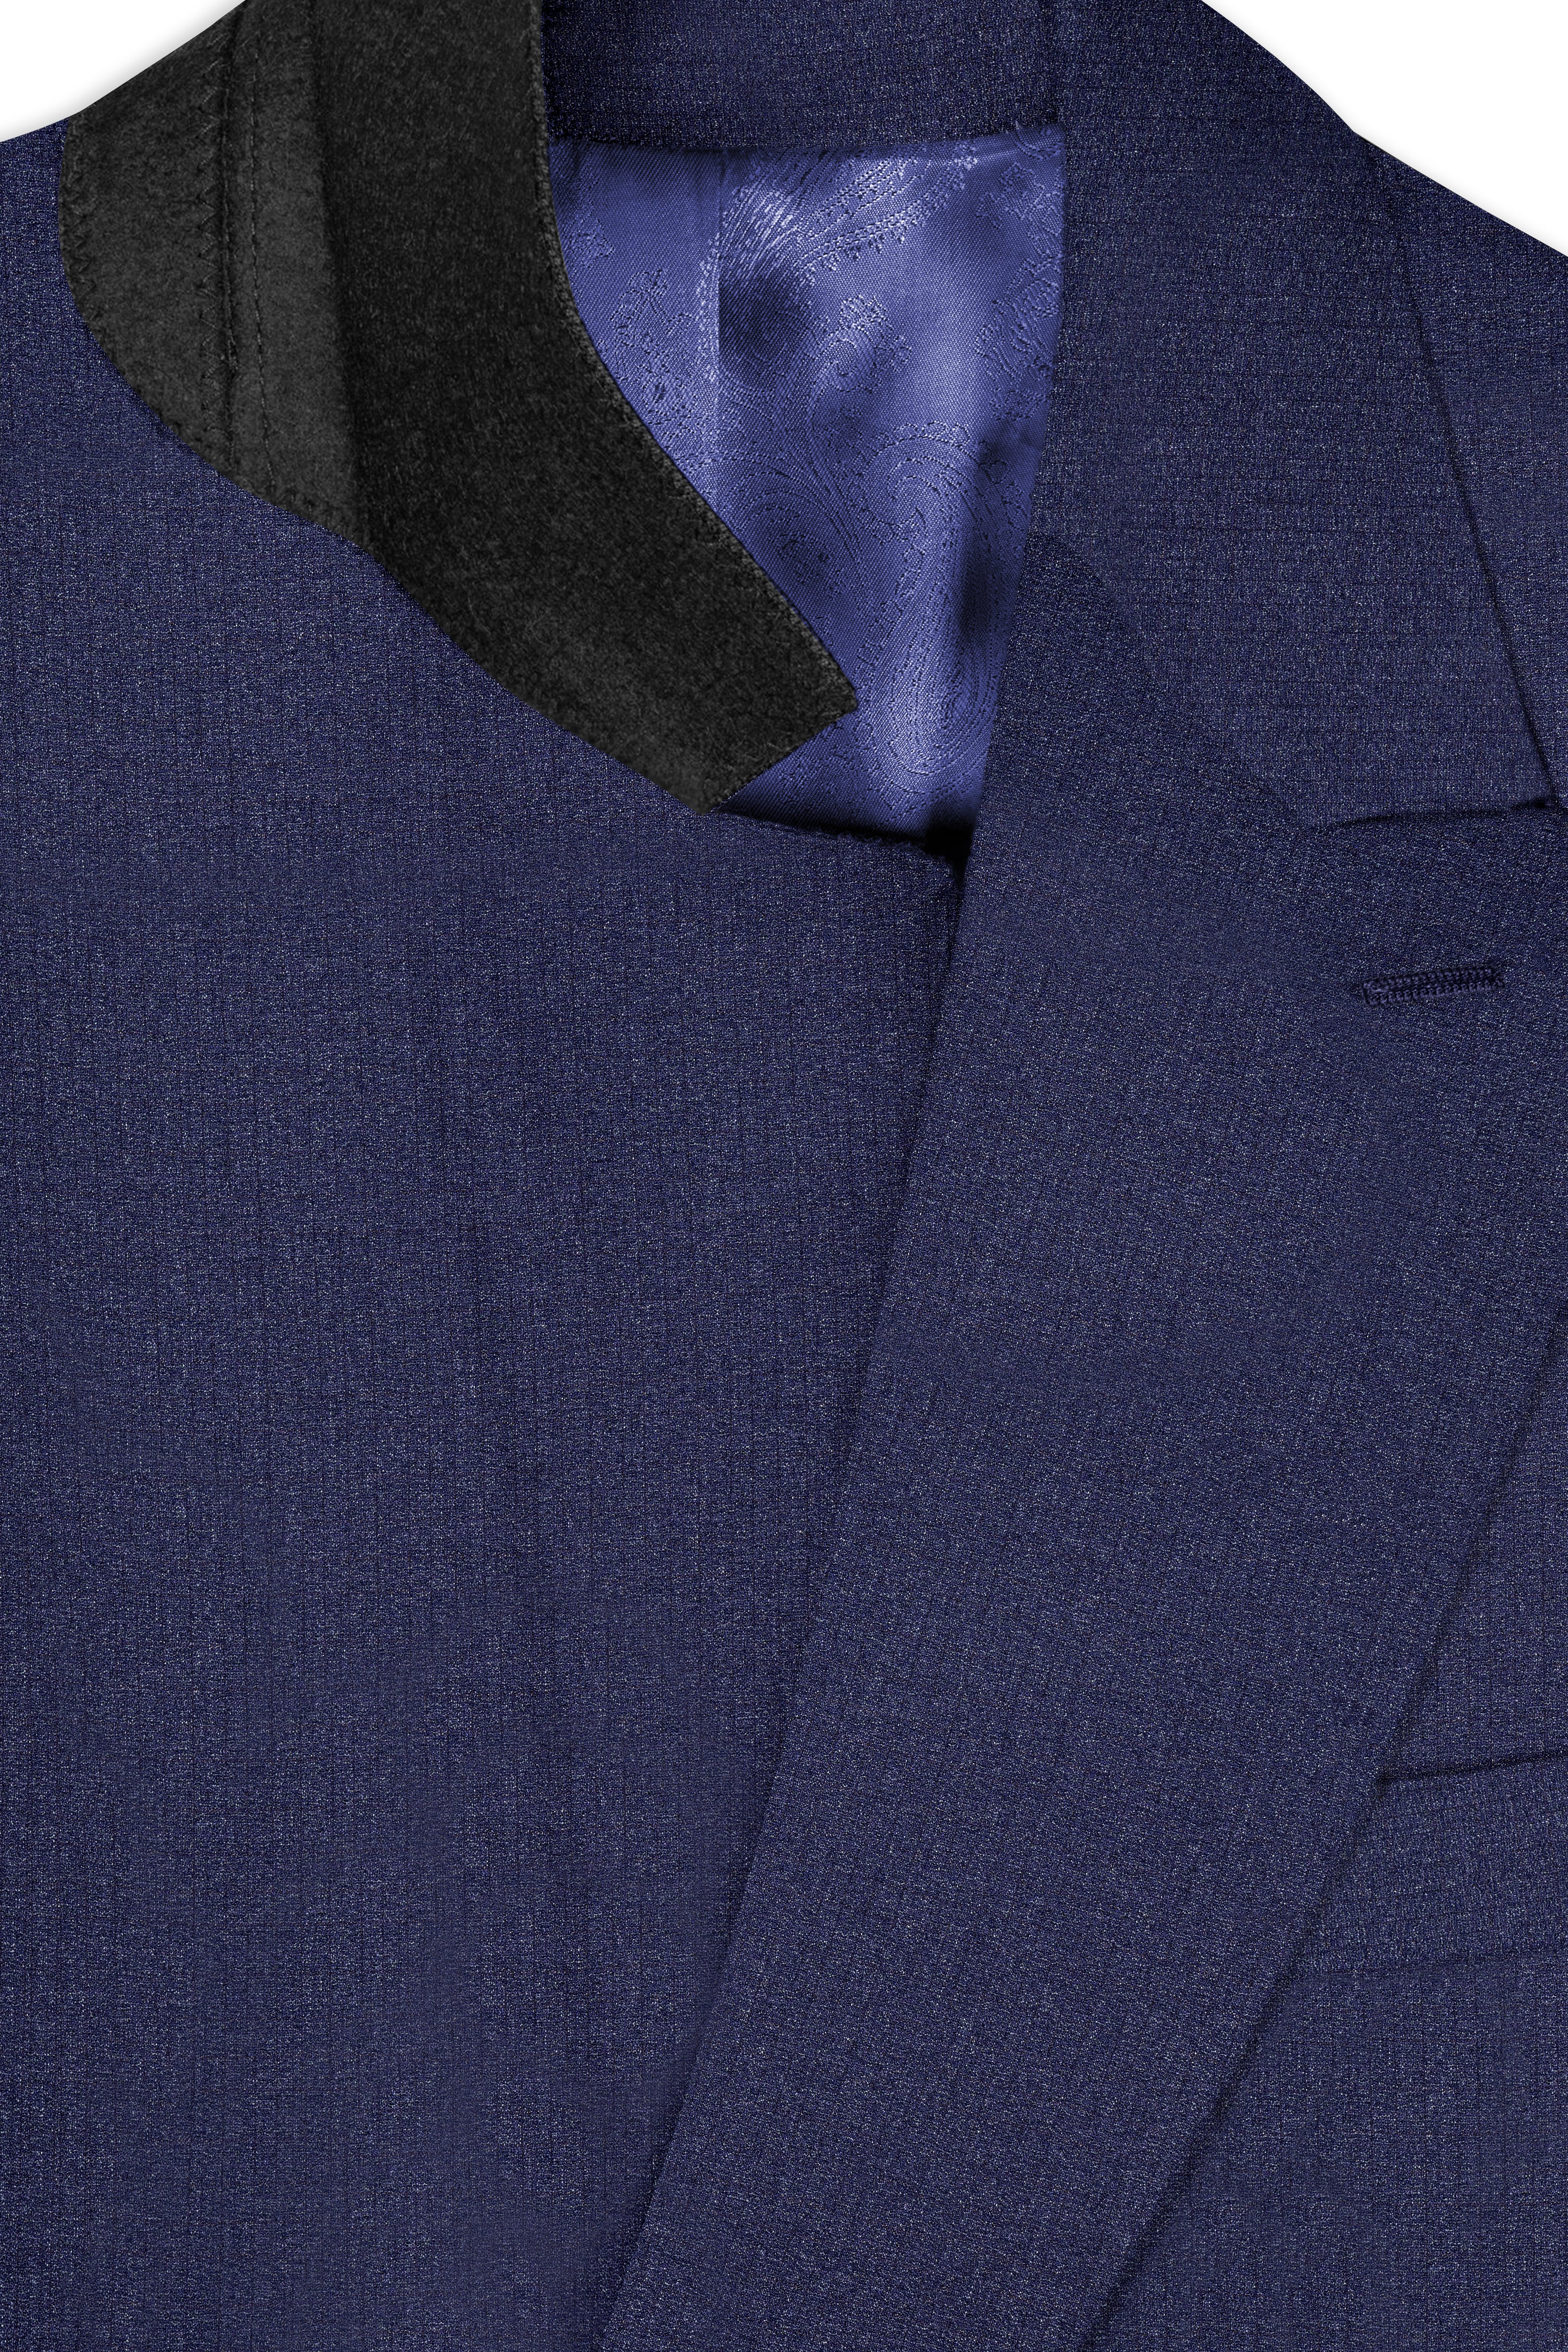 Ebony Clay Blue Textured Wool Blend Double Breasted Blazer